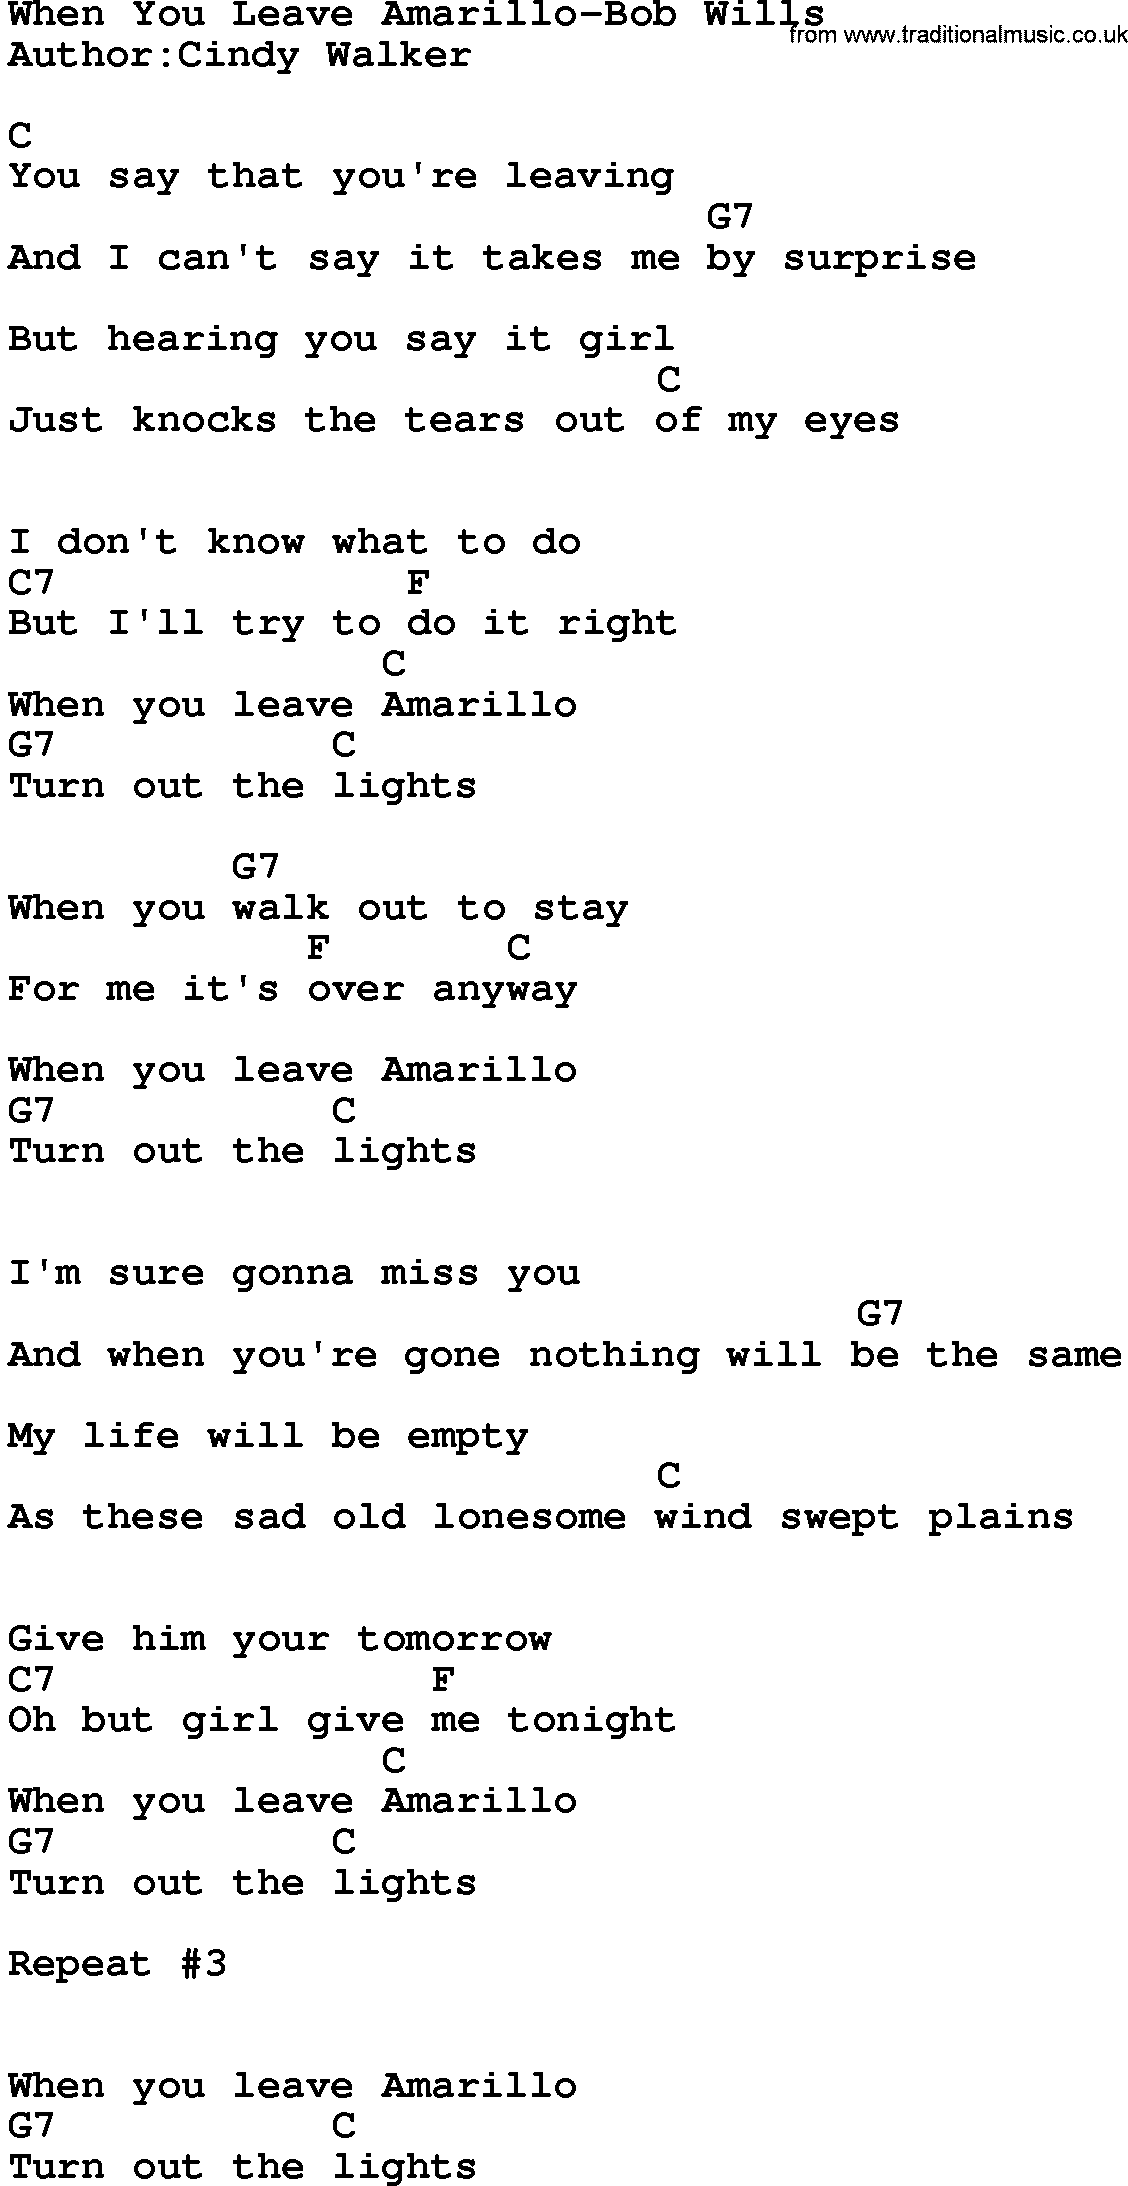 Country music song: When You Leave Amarillo-Bob Wills lyrics and chords